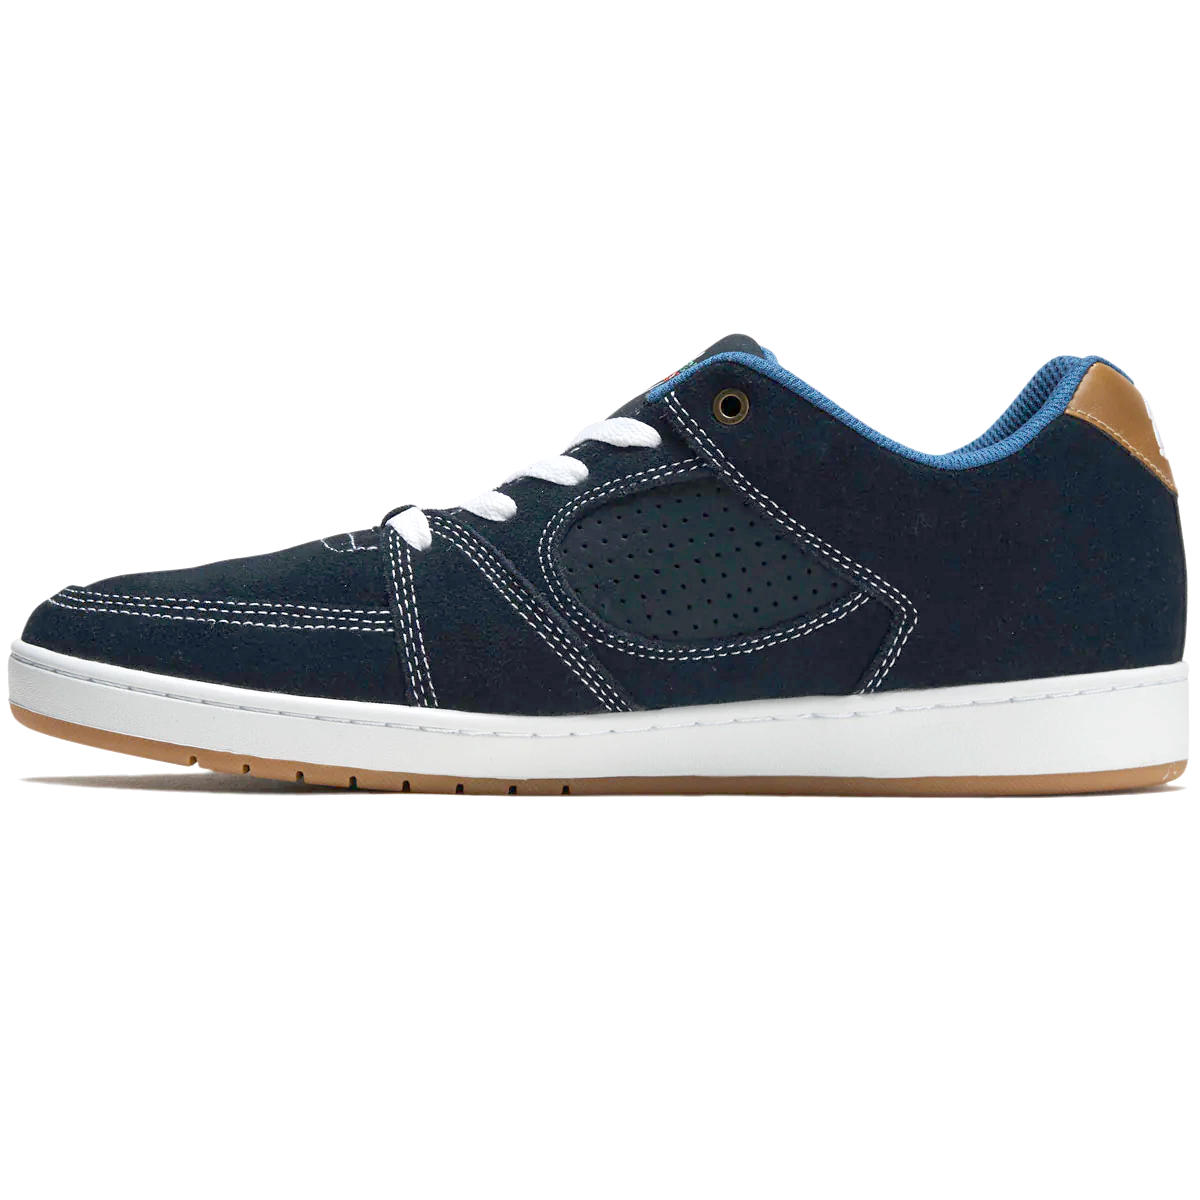 eS Accel Slim Shoes - Navy/White/Red image 2